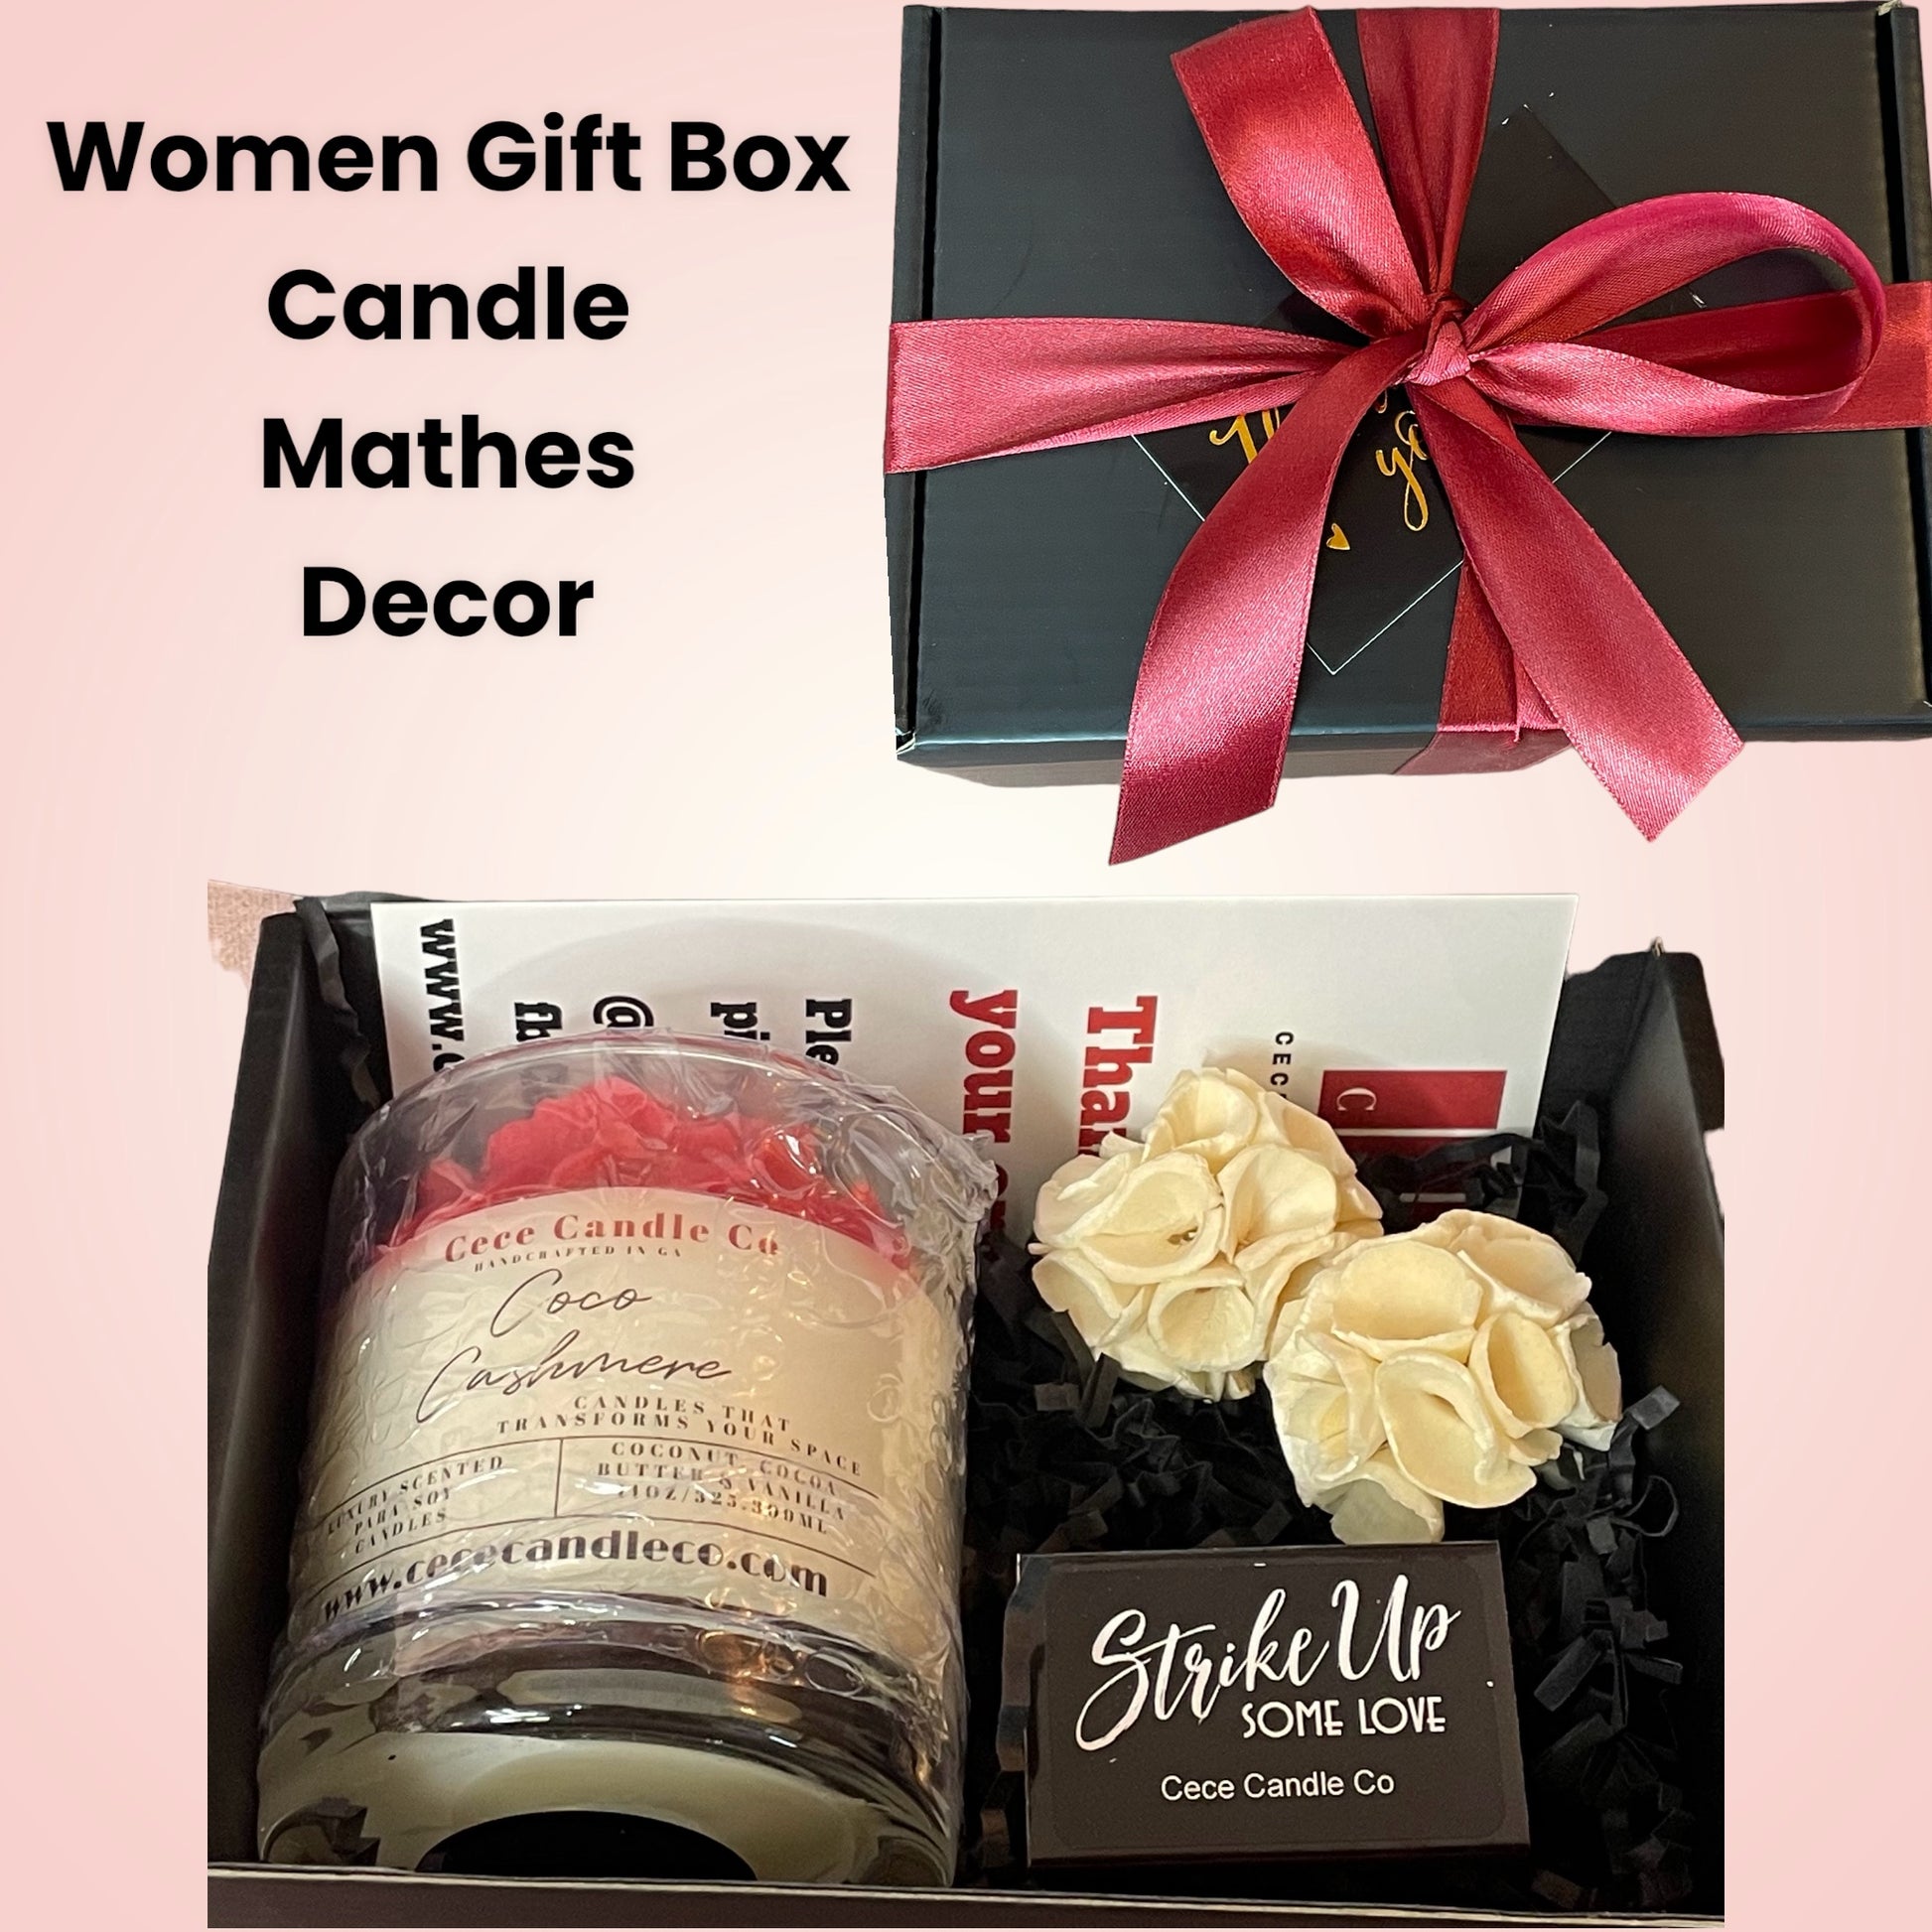 Gift Box for women. Comes with a Candle, Matches, and Decor.